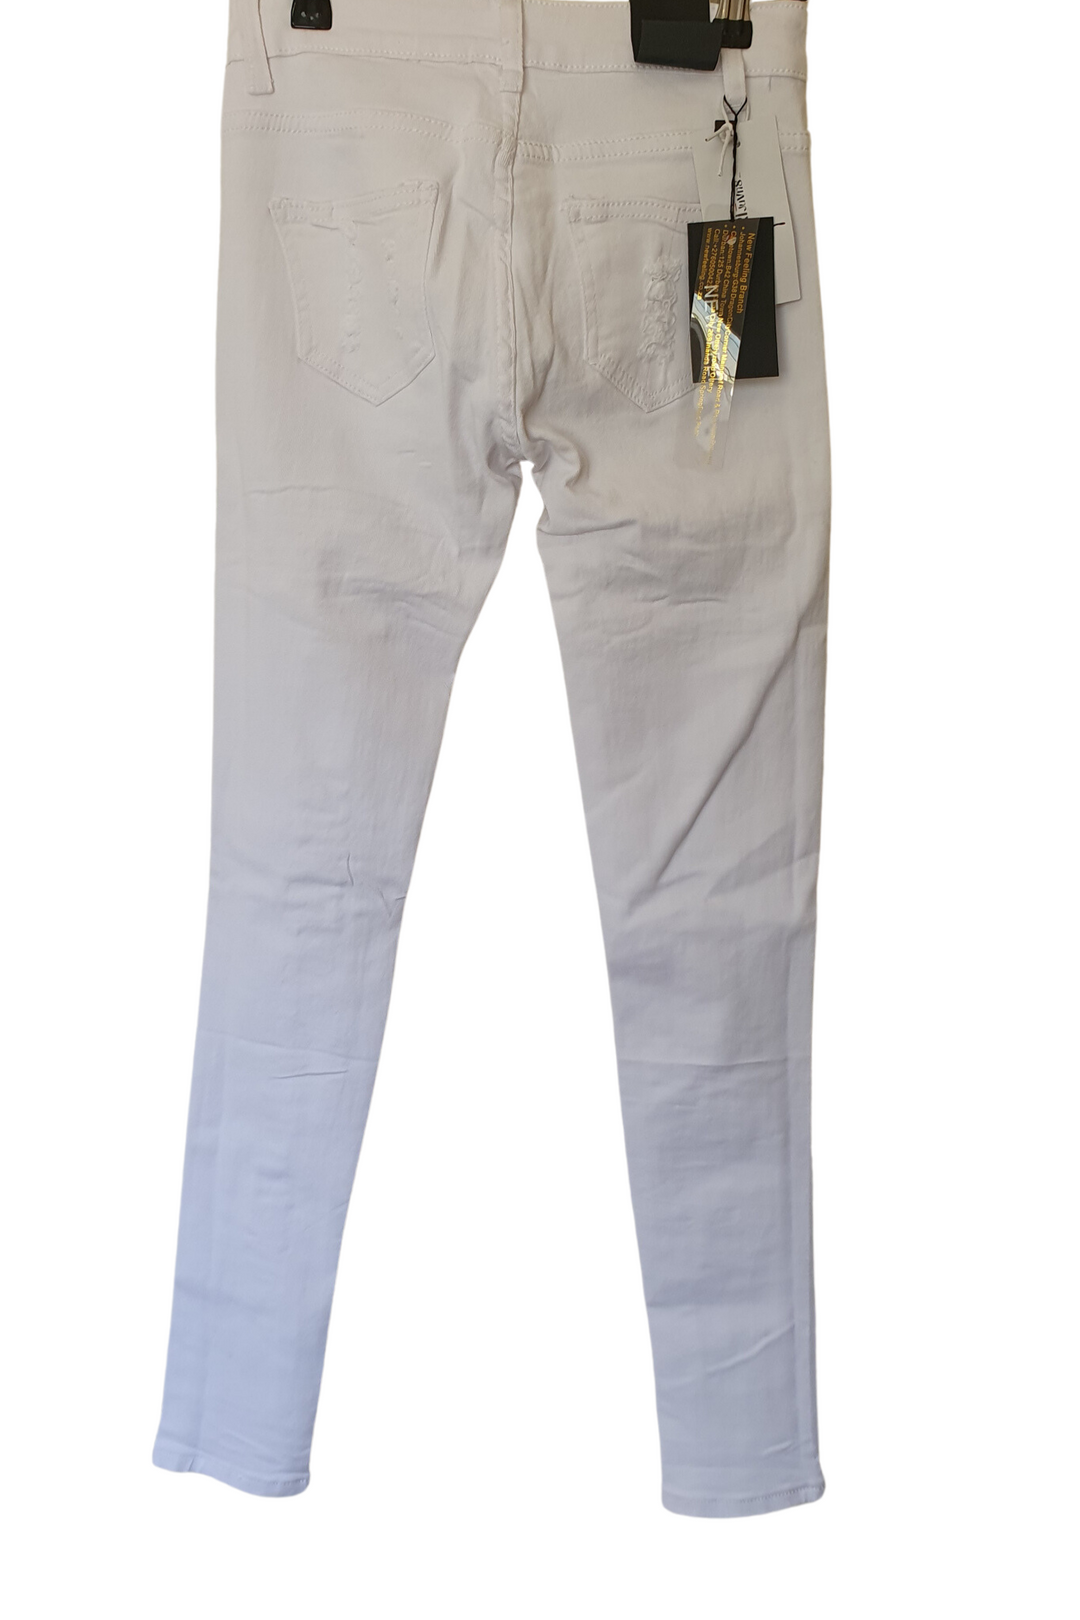 White Jean with ripped detail on legs